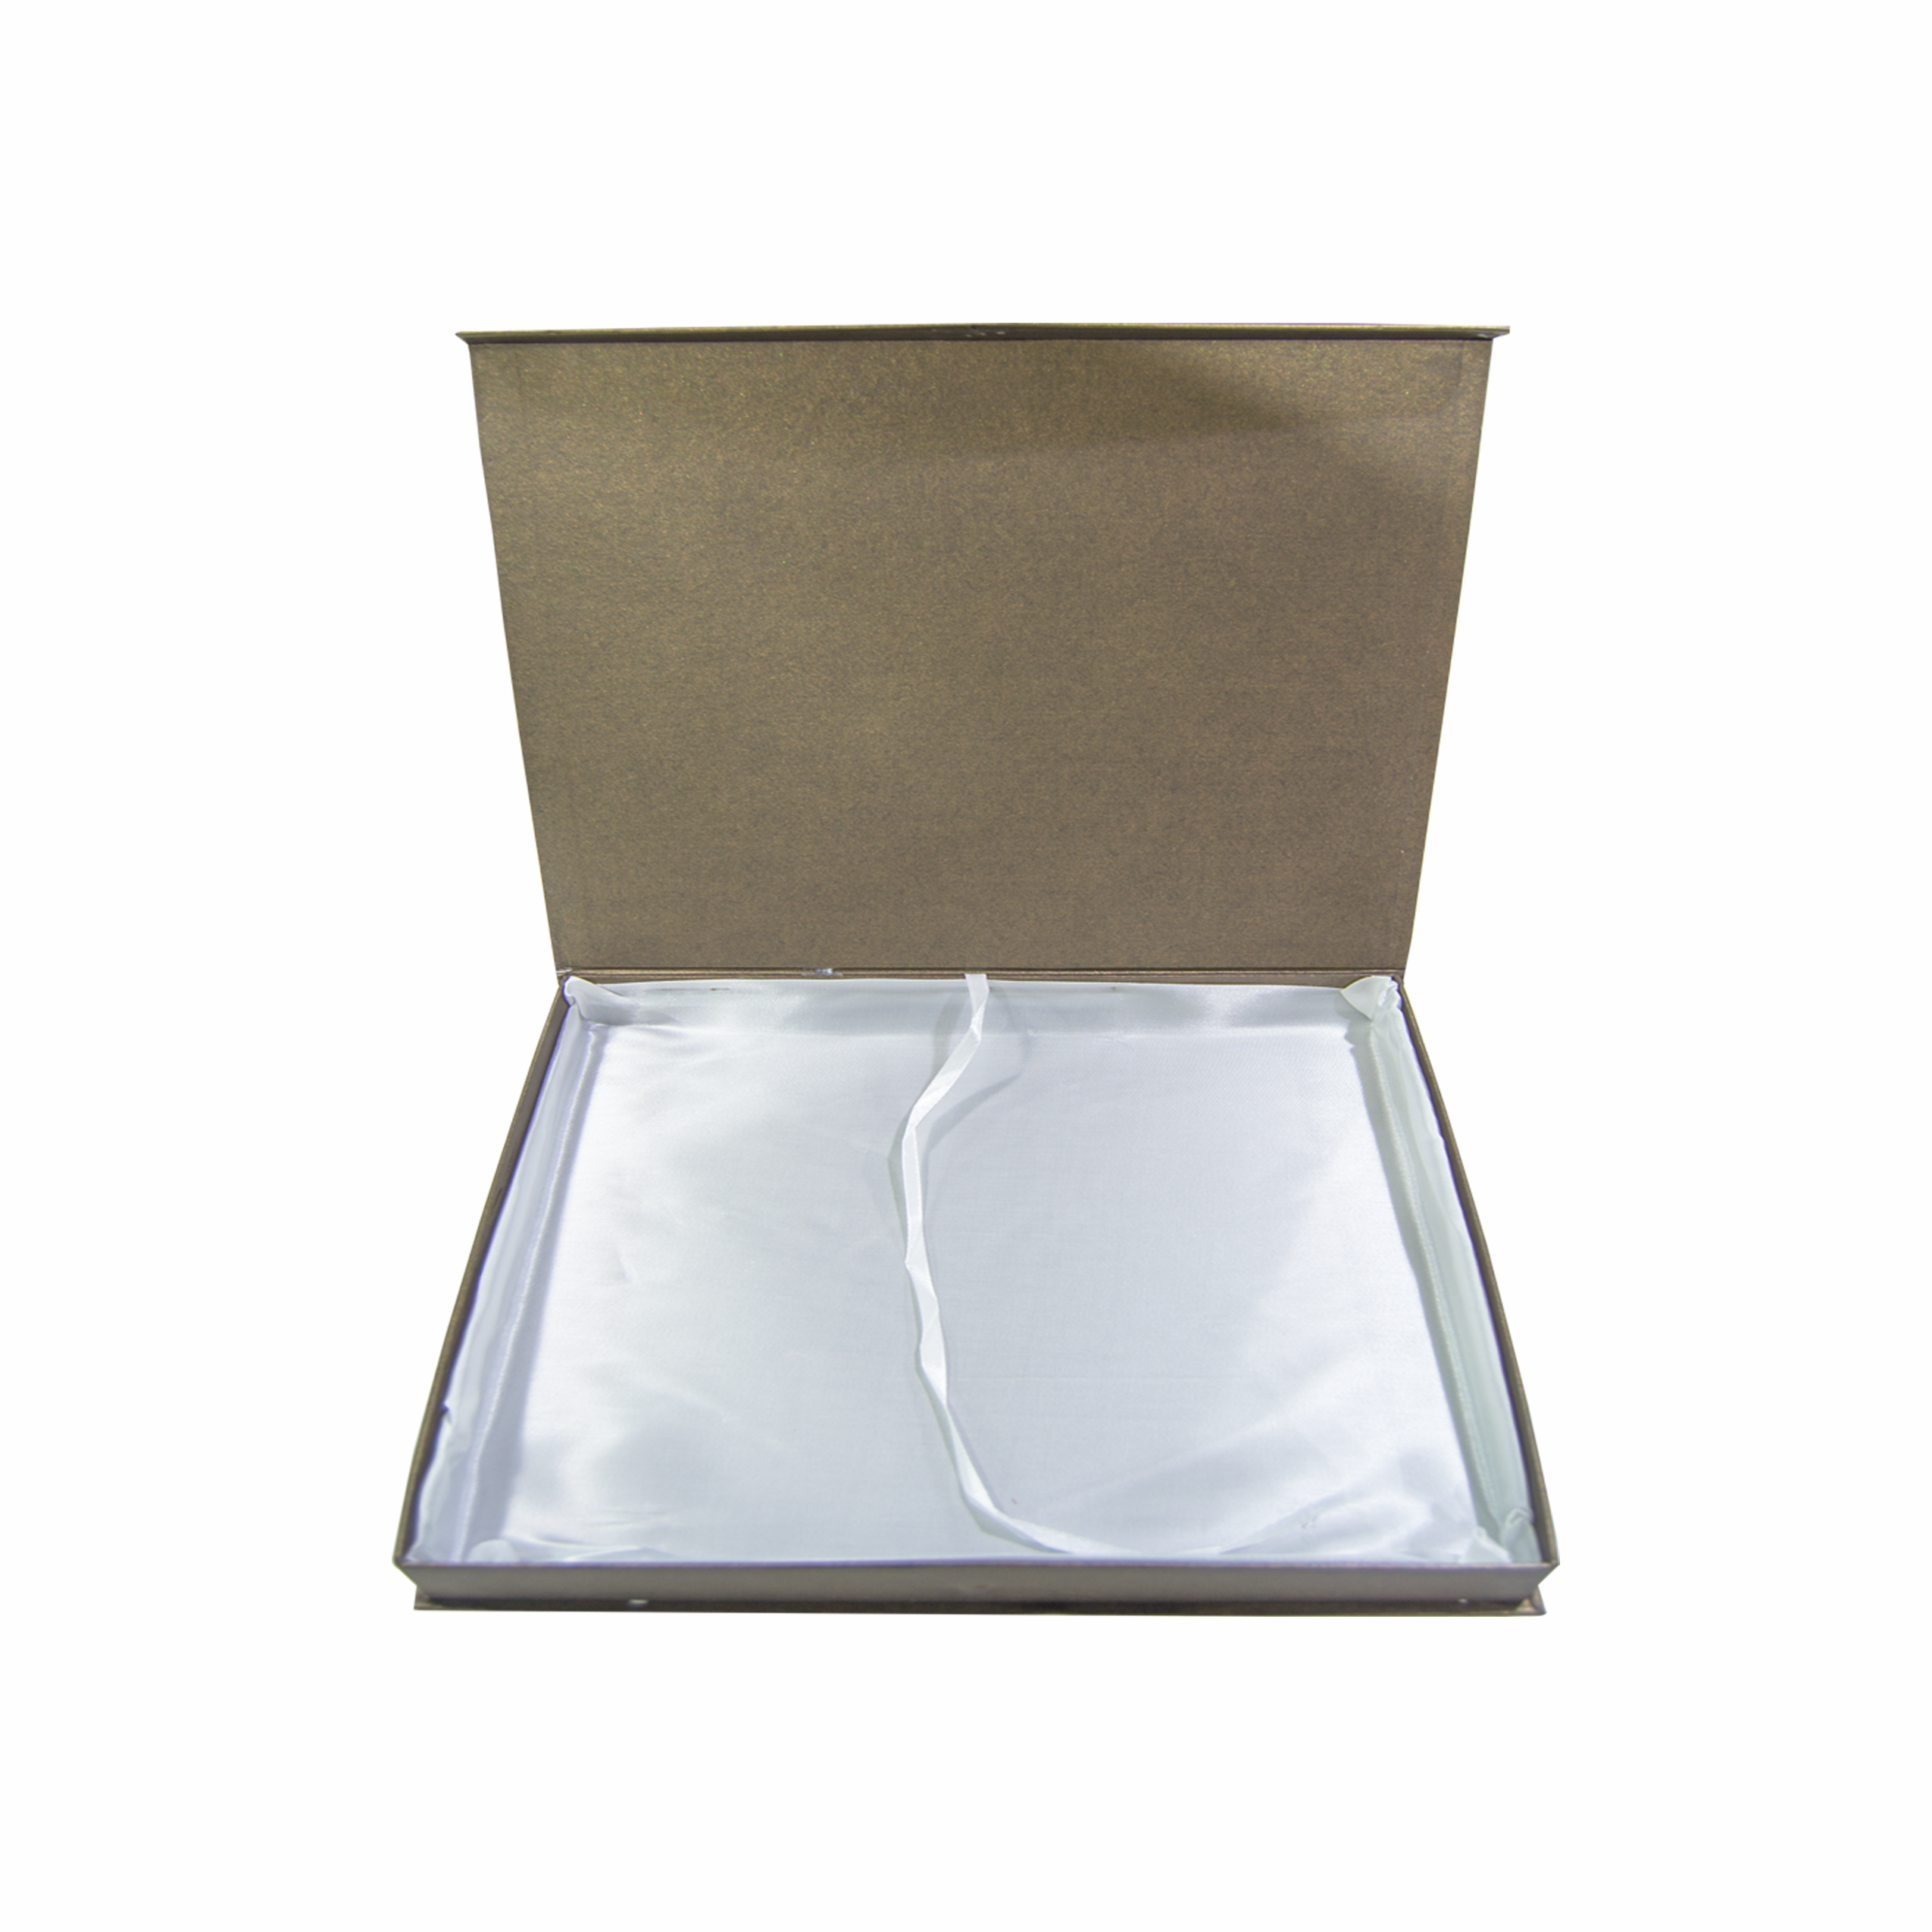 SILVER SALVER WOODEN TROPHY WITH PAPER BOX